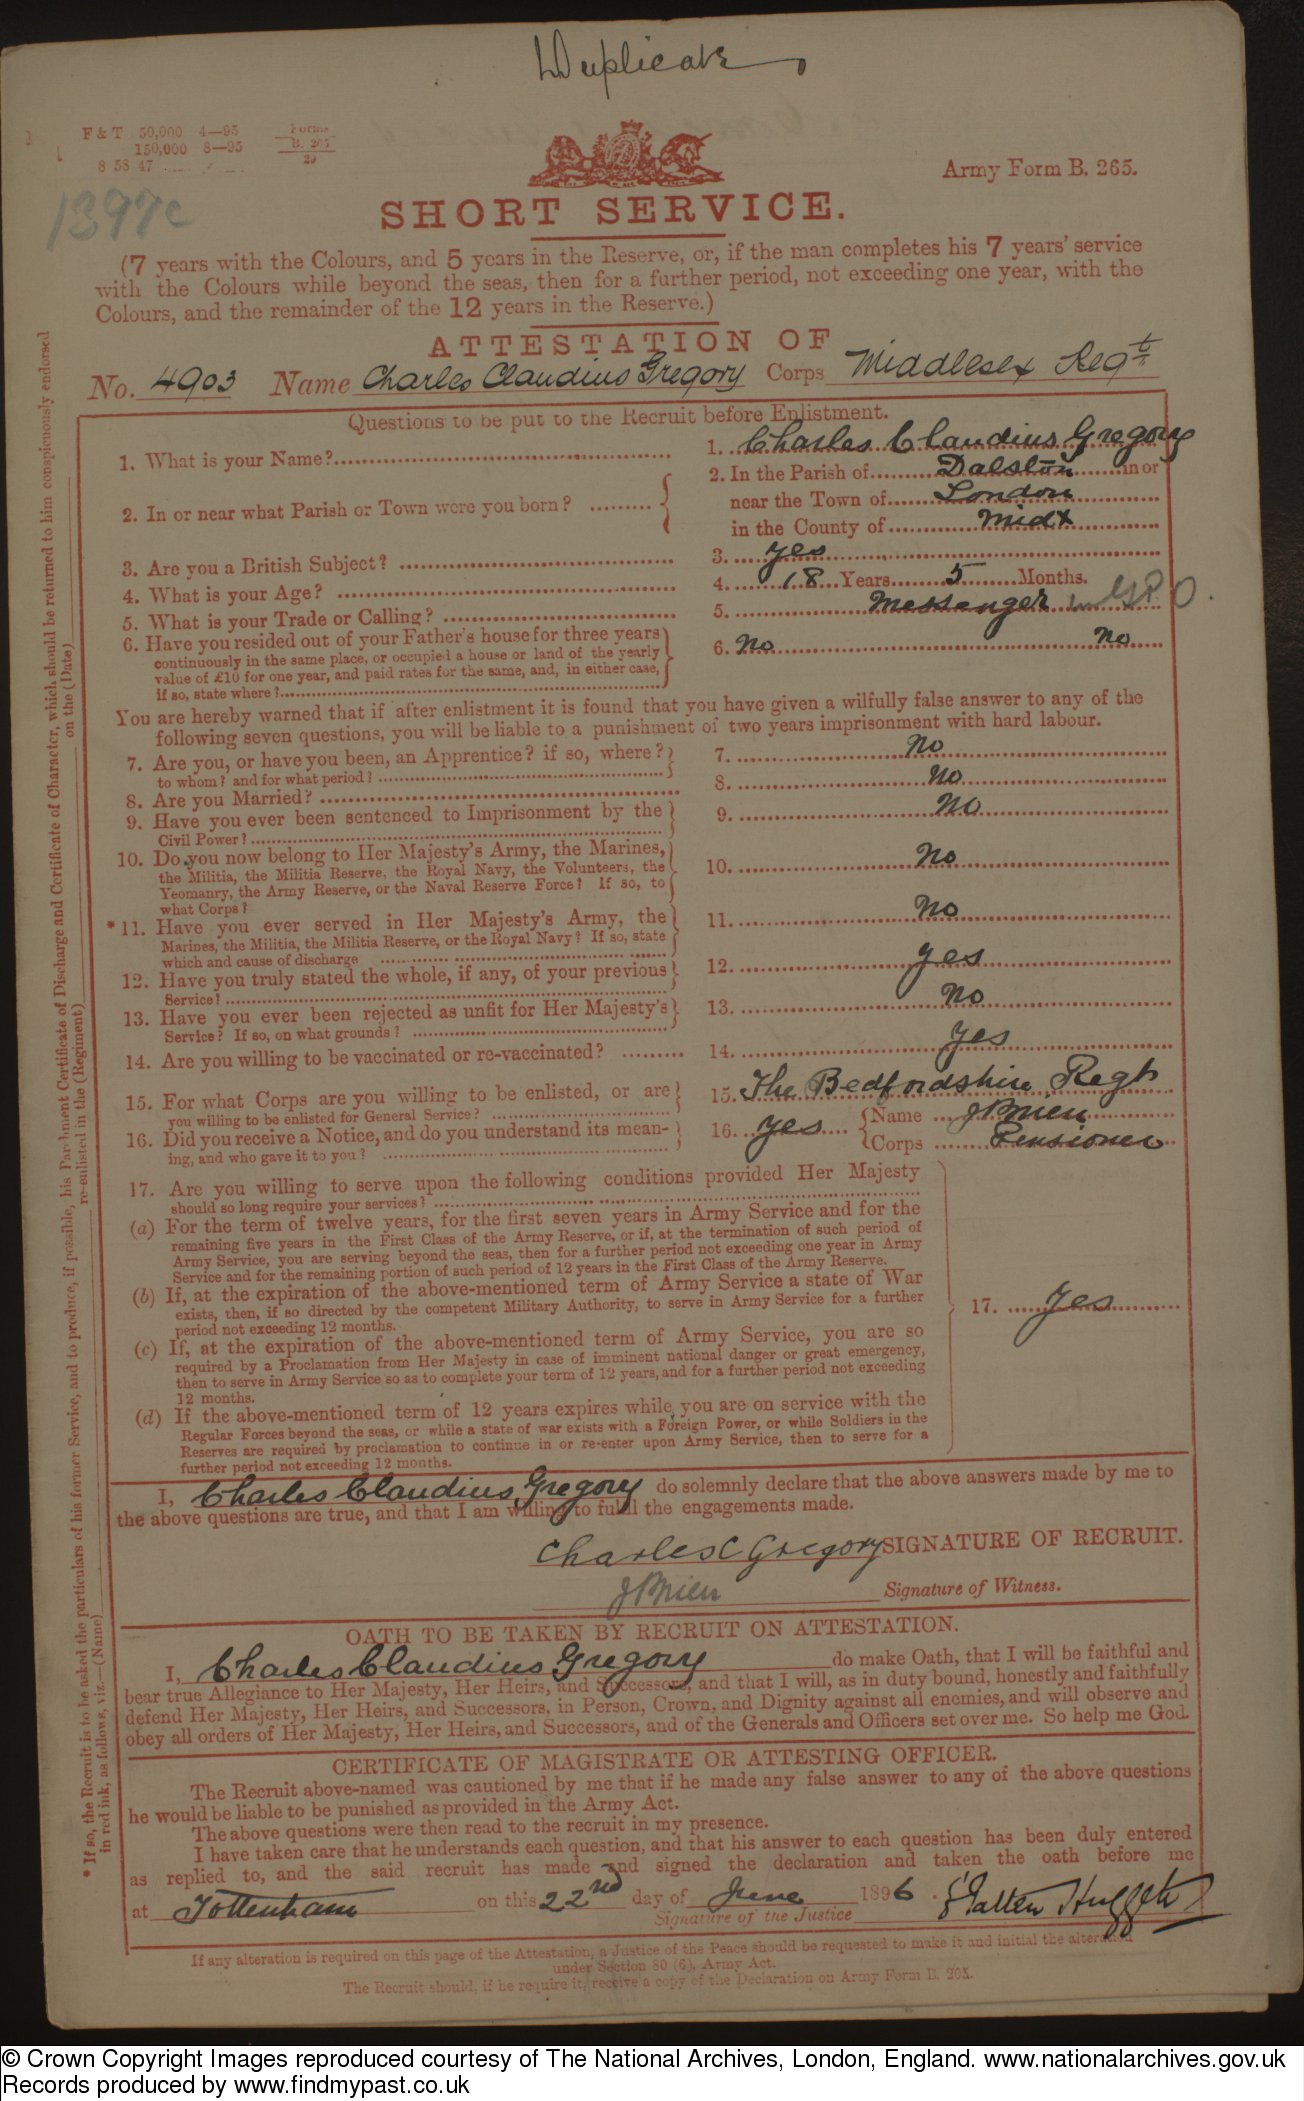 British Army service record for Charles Claudius Gregory in 1896